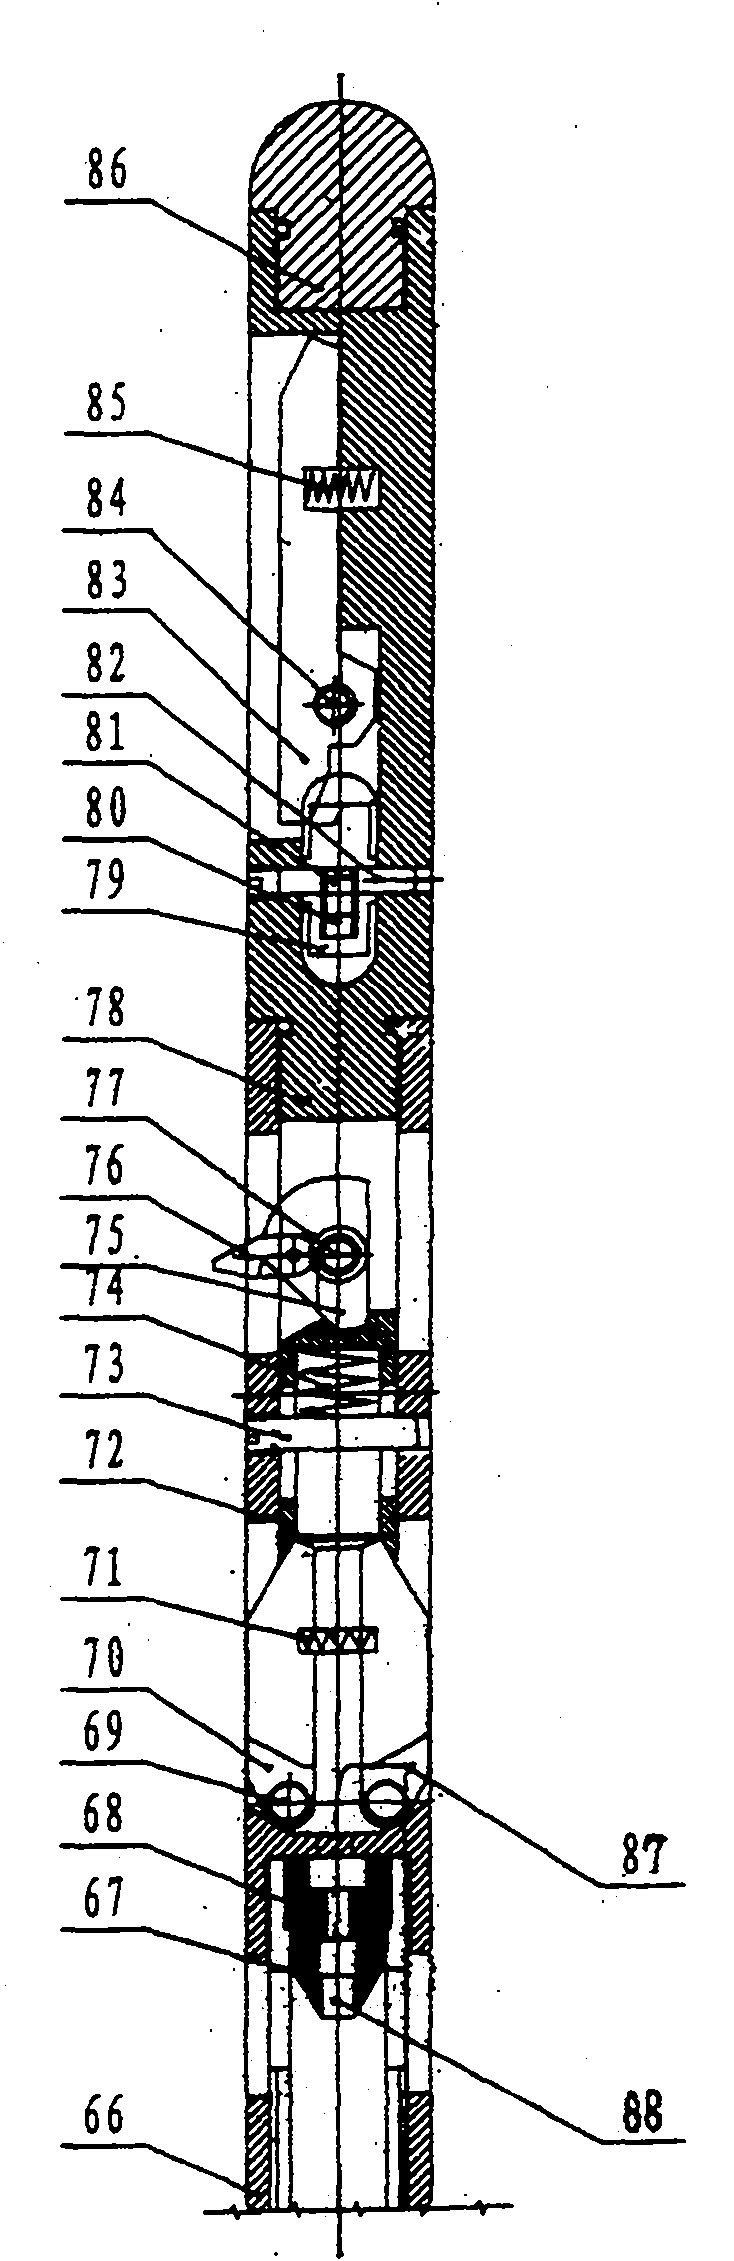 Intelligent synchronous testing and adjusting method capable of simultaneously infusing, testing and regulating